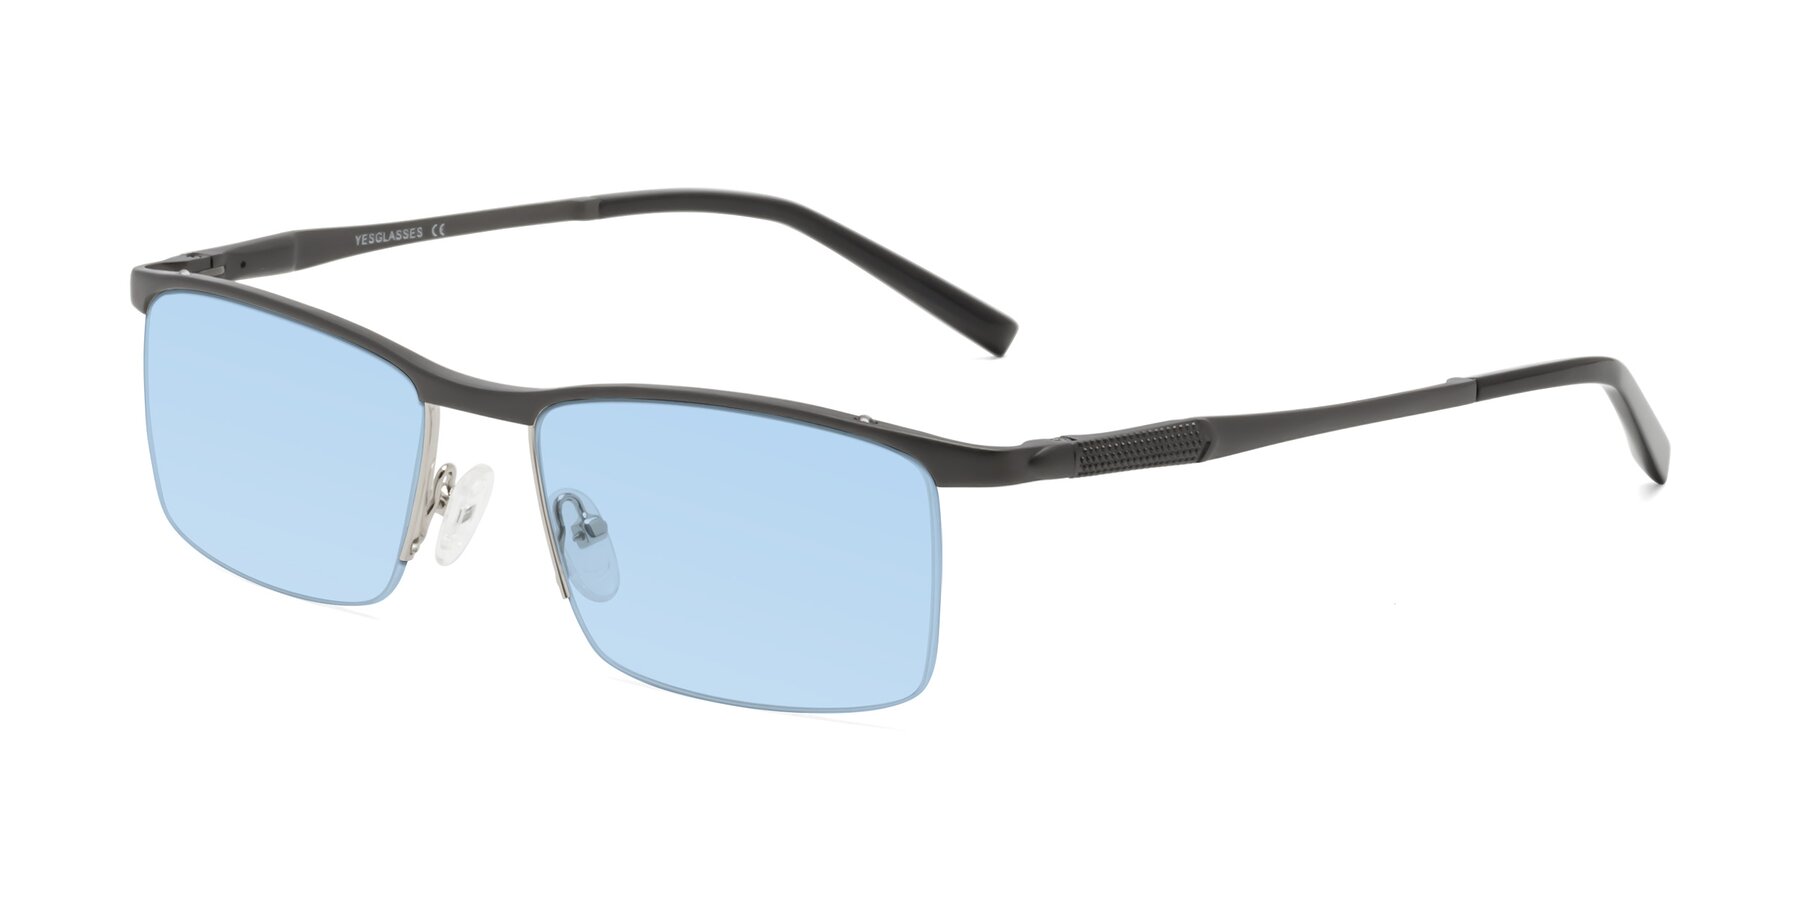 Angle of CX6303 in Gunmetal with Light Blue Tinted Lenses